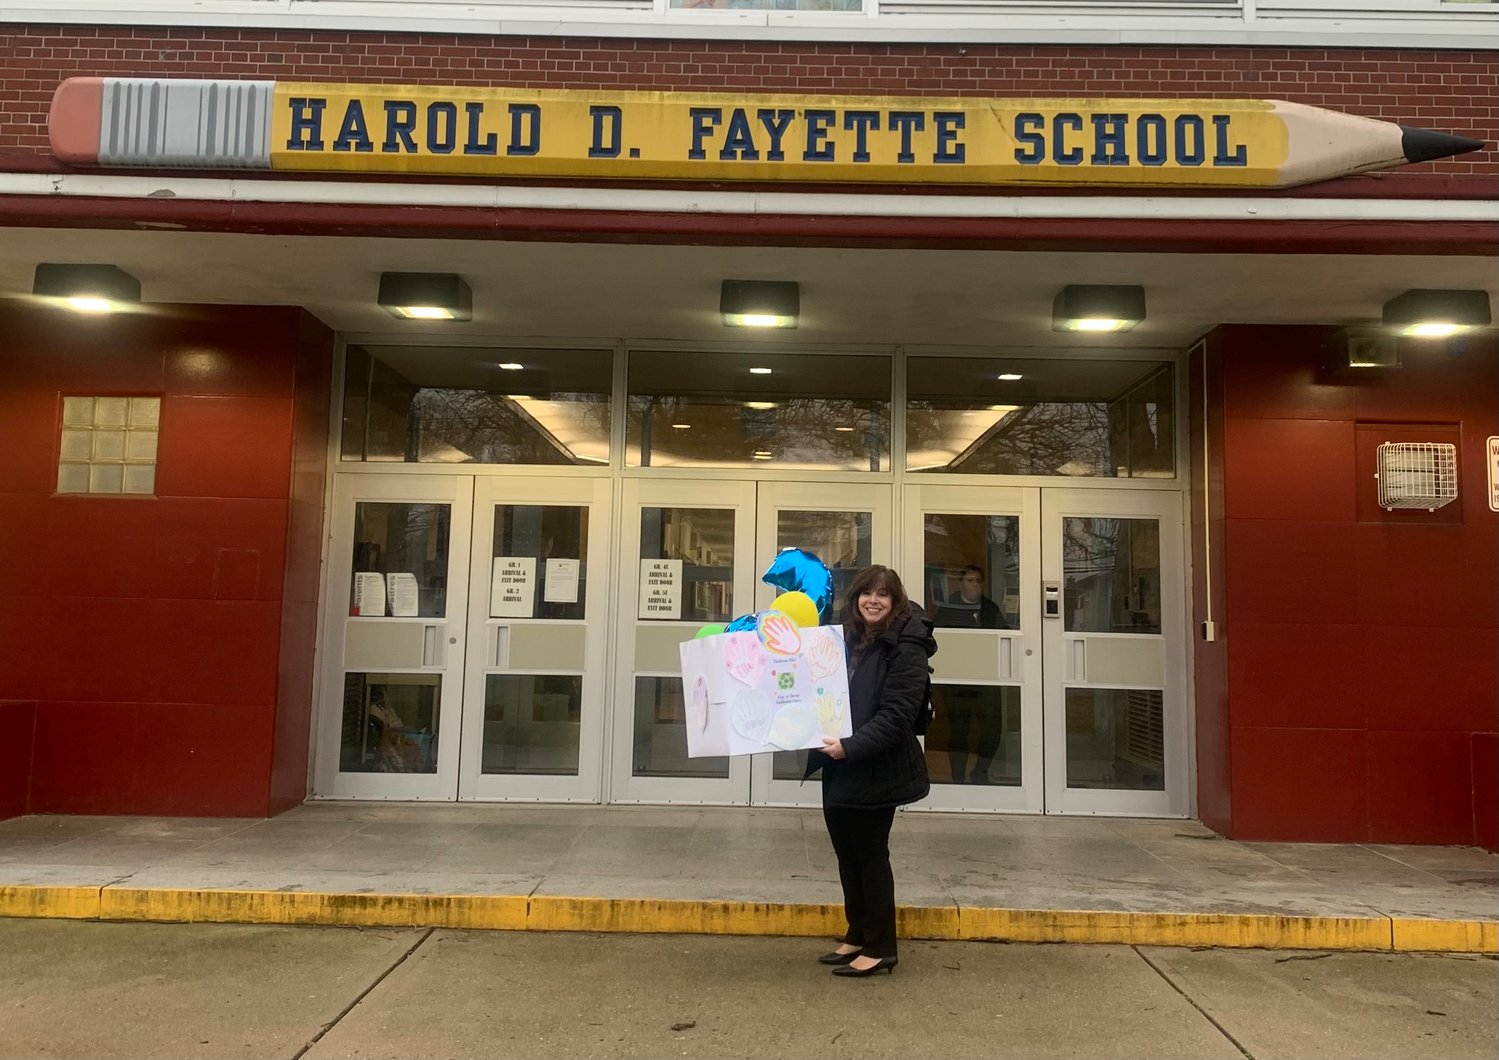 Seibold, outside of Harold D. Fayette School in the North Merrick Union Free School District. The nonprofit is partnering with North Merrick schools and the Bellmore-Merrick Central High School District, for their schools to be places in the community where the public can safely discard balloons.